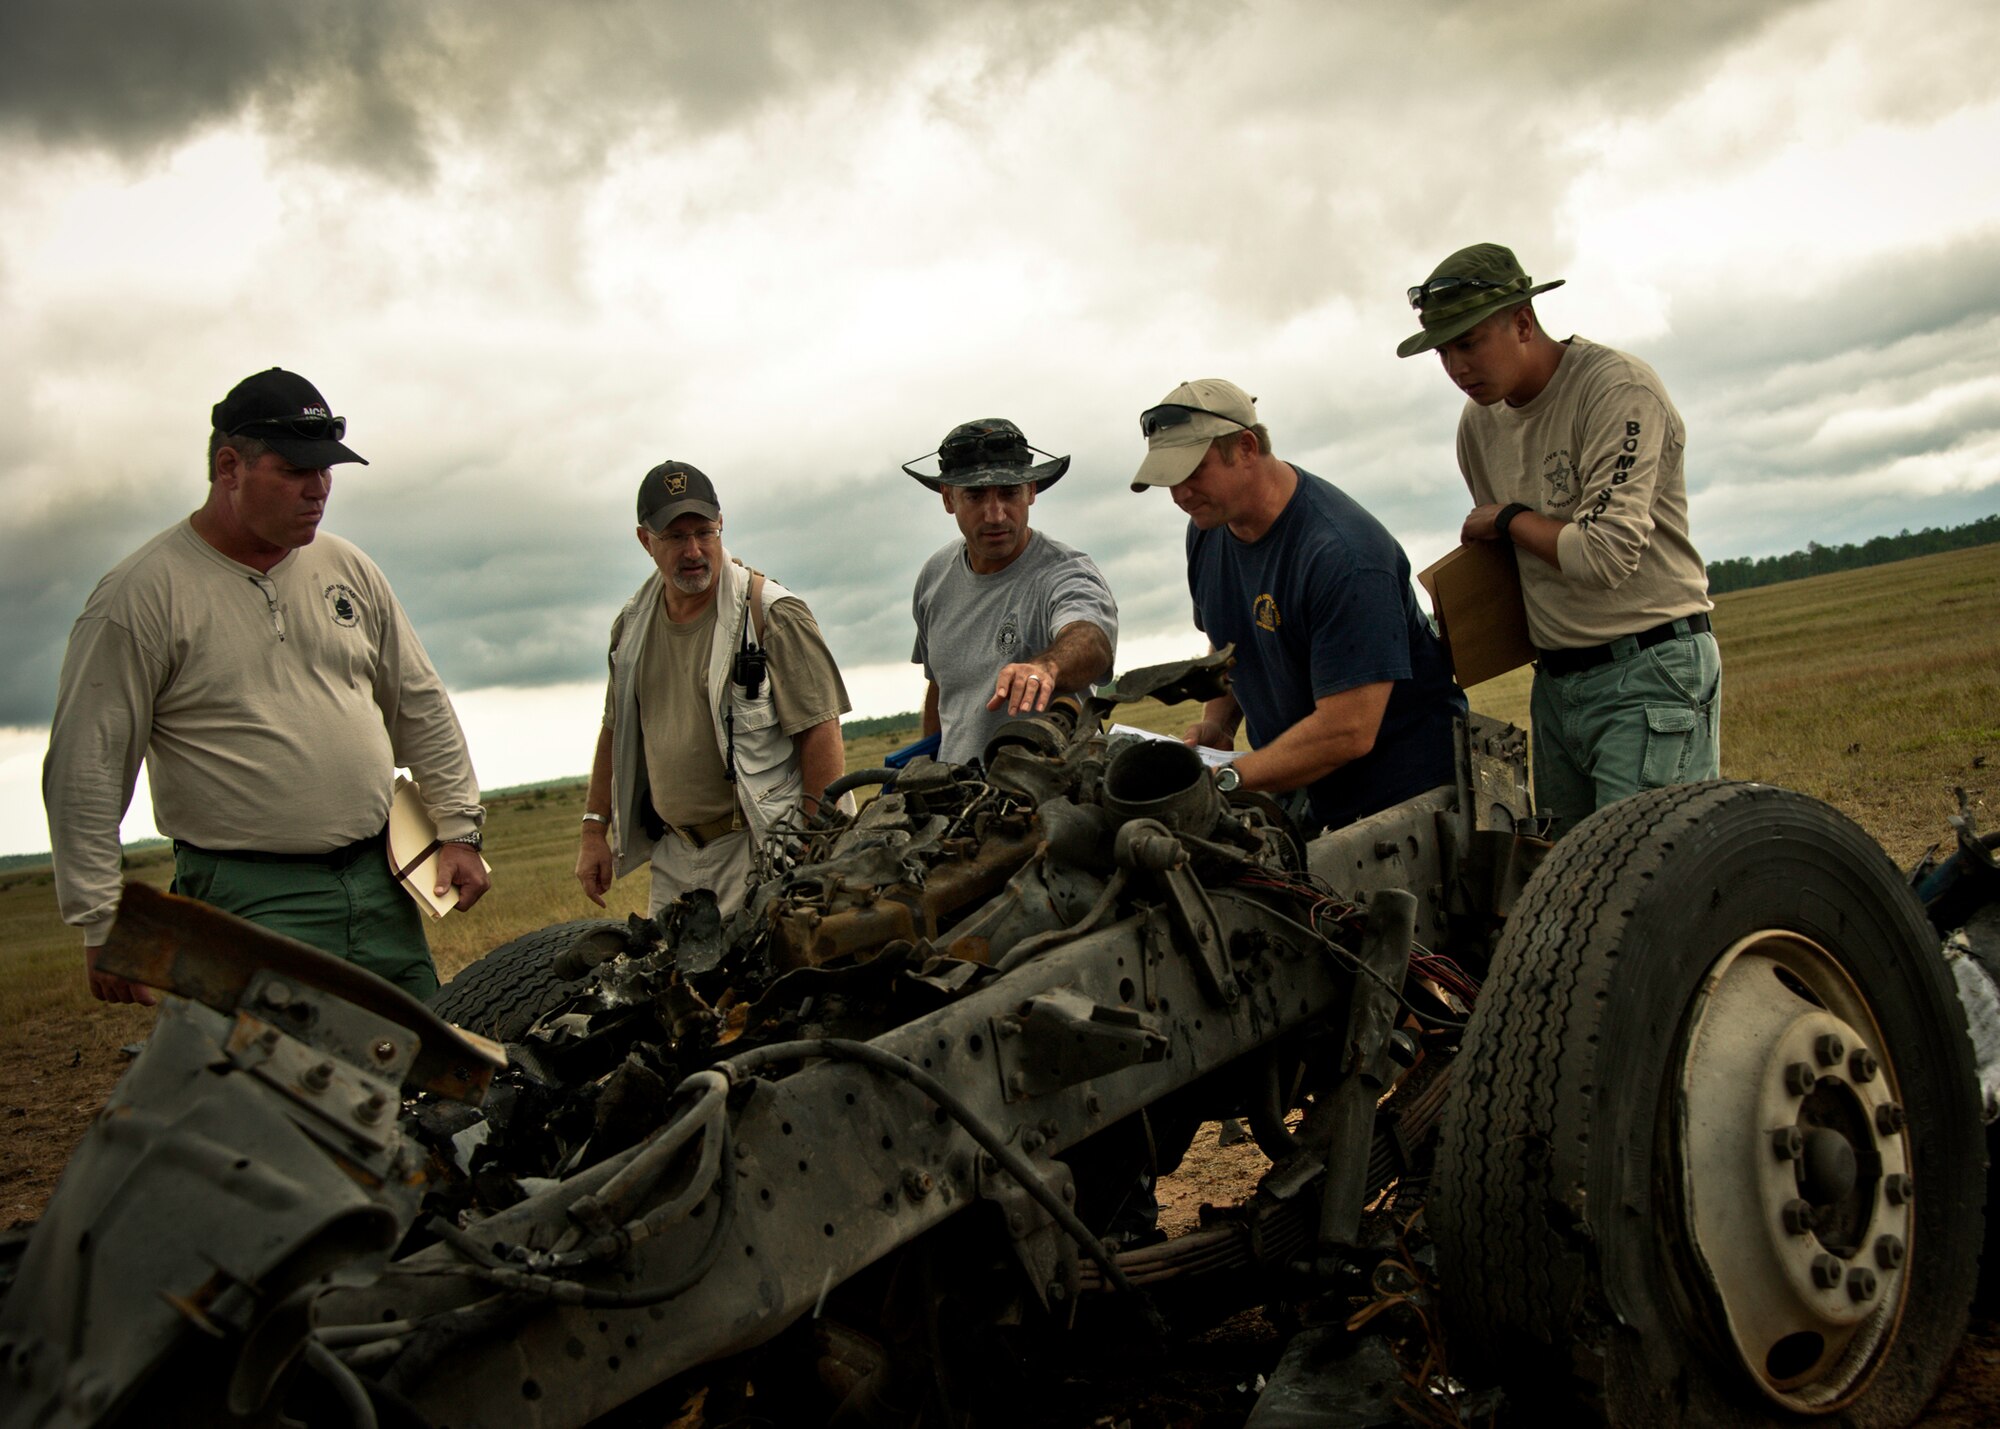 Capt. Thomas Bosco, a Florida State fire marshal, (middle) and other team members size up the blast scene and try to determine where the vehicle’s identification number may be located Sept. 28 on the Eglin Air Force Base range.  The investigation was part of the FBI's large vehicle post blast school attended by state and local law enforcement agencies as well as Navy and Air Force explosive ordnance disposal technicians. Three vehicles were blown up to create the crime scenes that students would investigate. The week-long course was the second held on Eglin with 67 students representing 18 different U.S. agencies. (U.S. Air Force photo/ Samuel King Jr.)